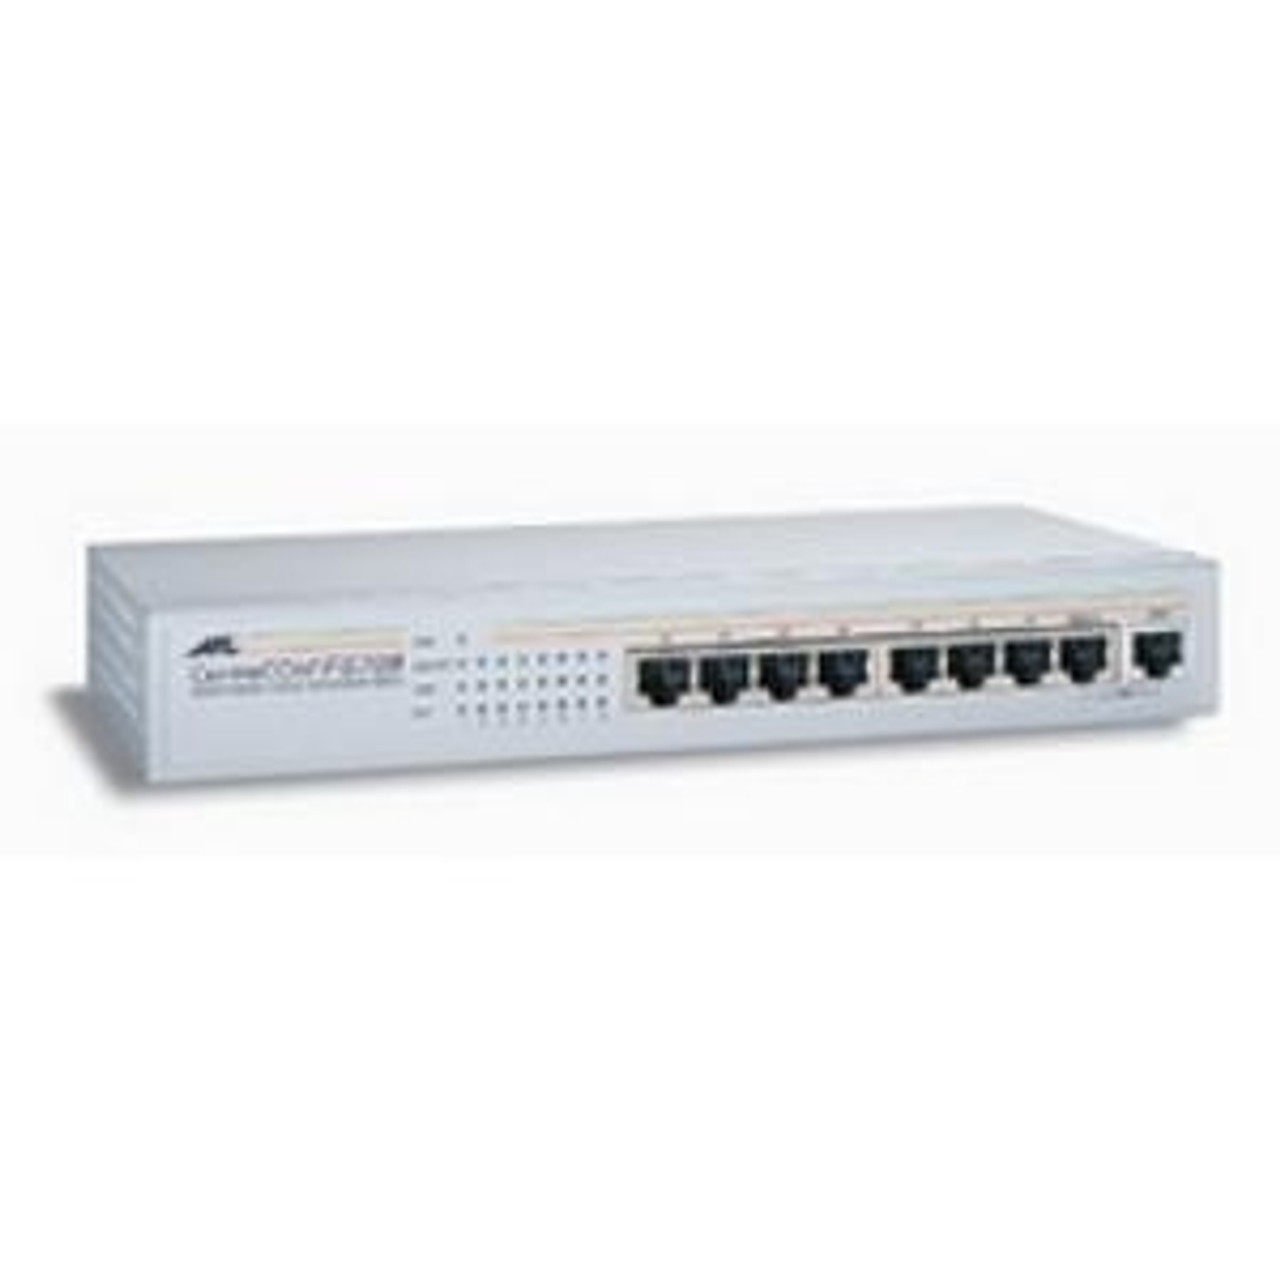 AT-FS708-20 Allied Telesis AT-FS708 unmanaged Ethernet Switch (Refurbished)